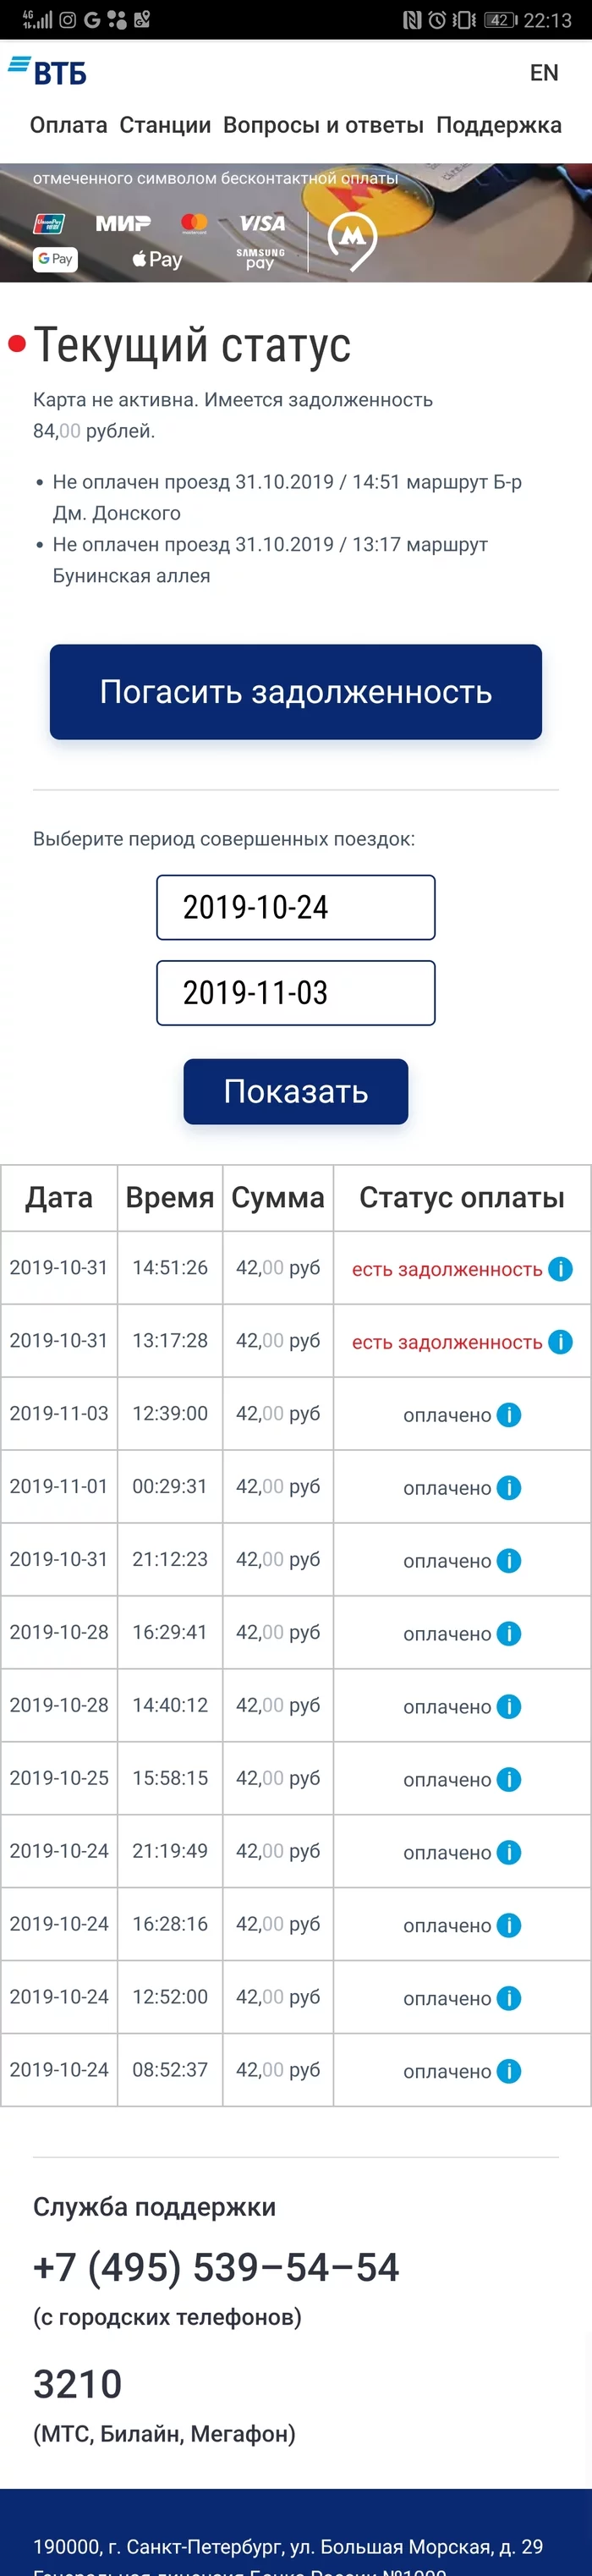 New adventures of the MIR card in the Moscow metro - My, Metro, VTB Bank, MIR payment system, Fraud, Longpost, Screenshot, Sberbank